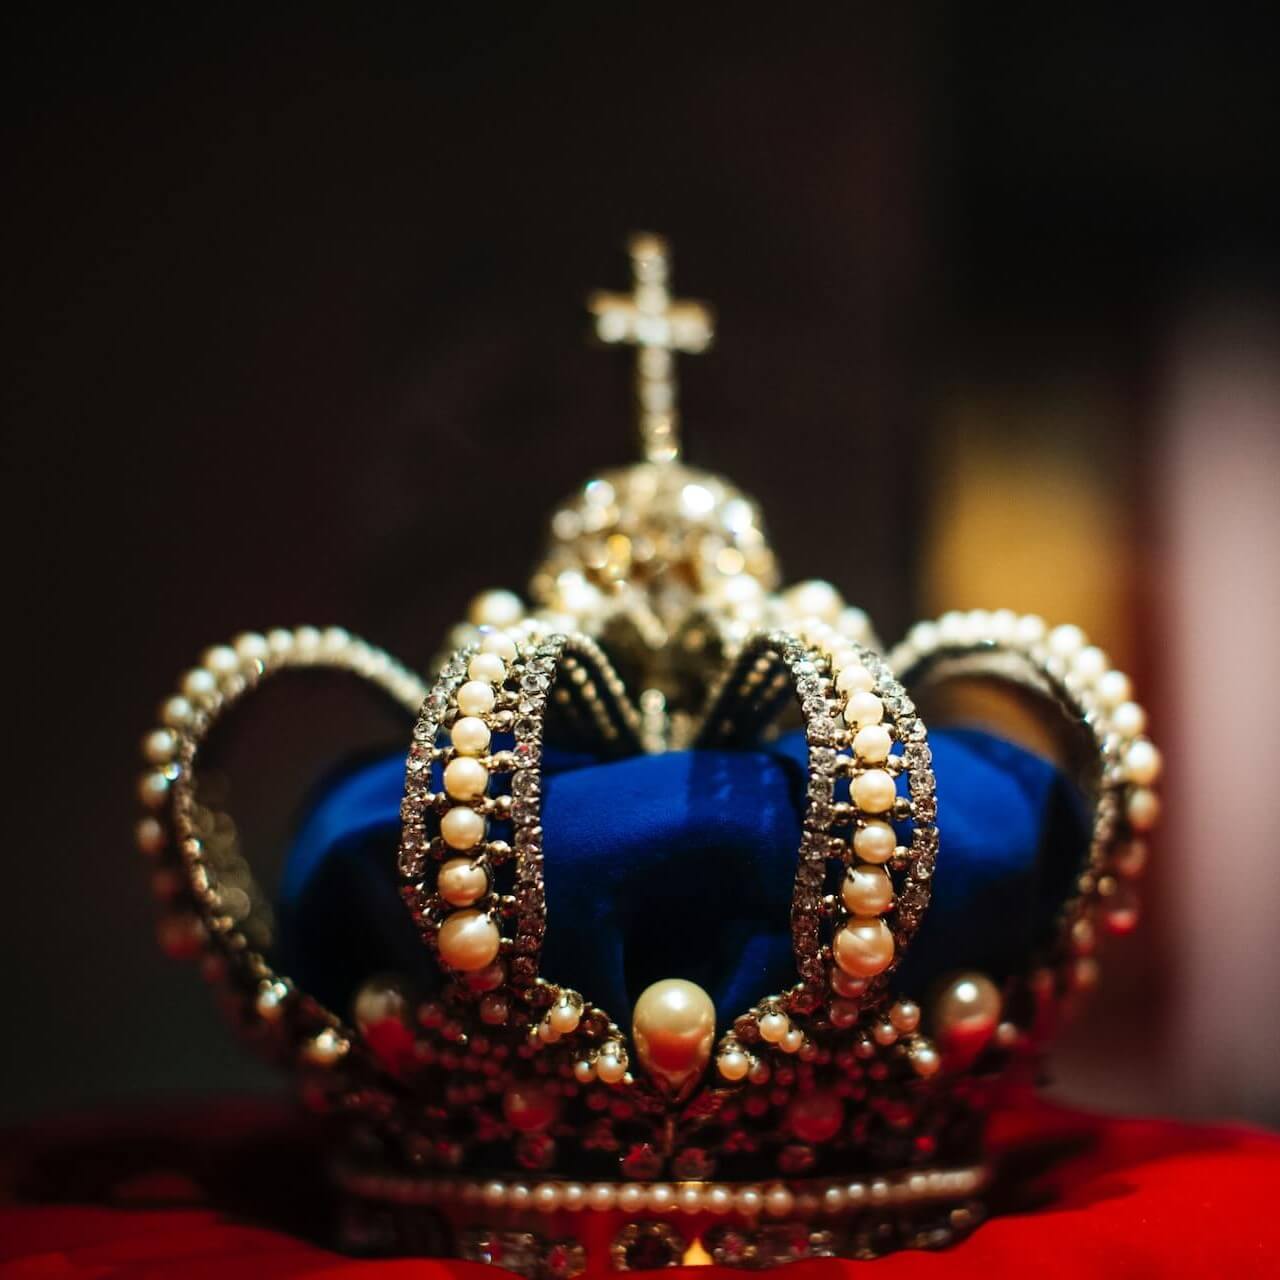 Picture of Crown with blue velvet adorned with pearls and a cross on top.